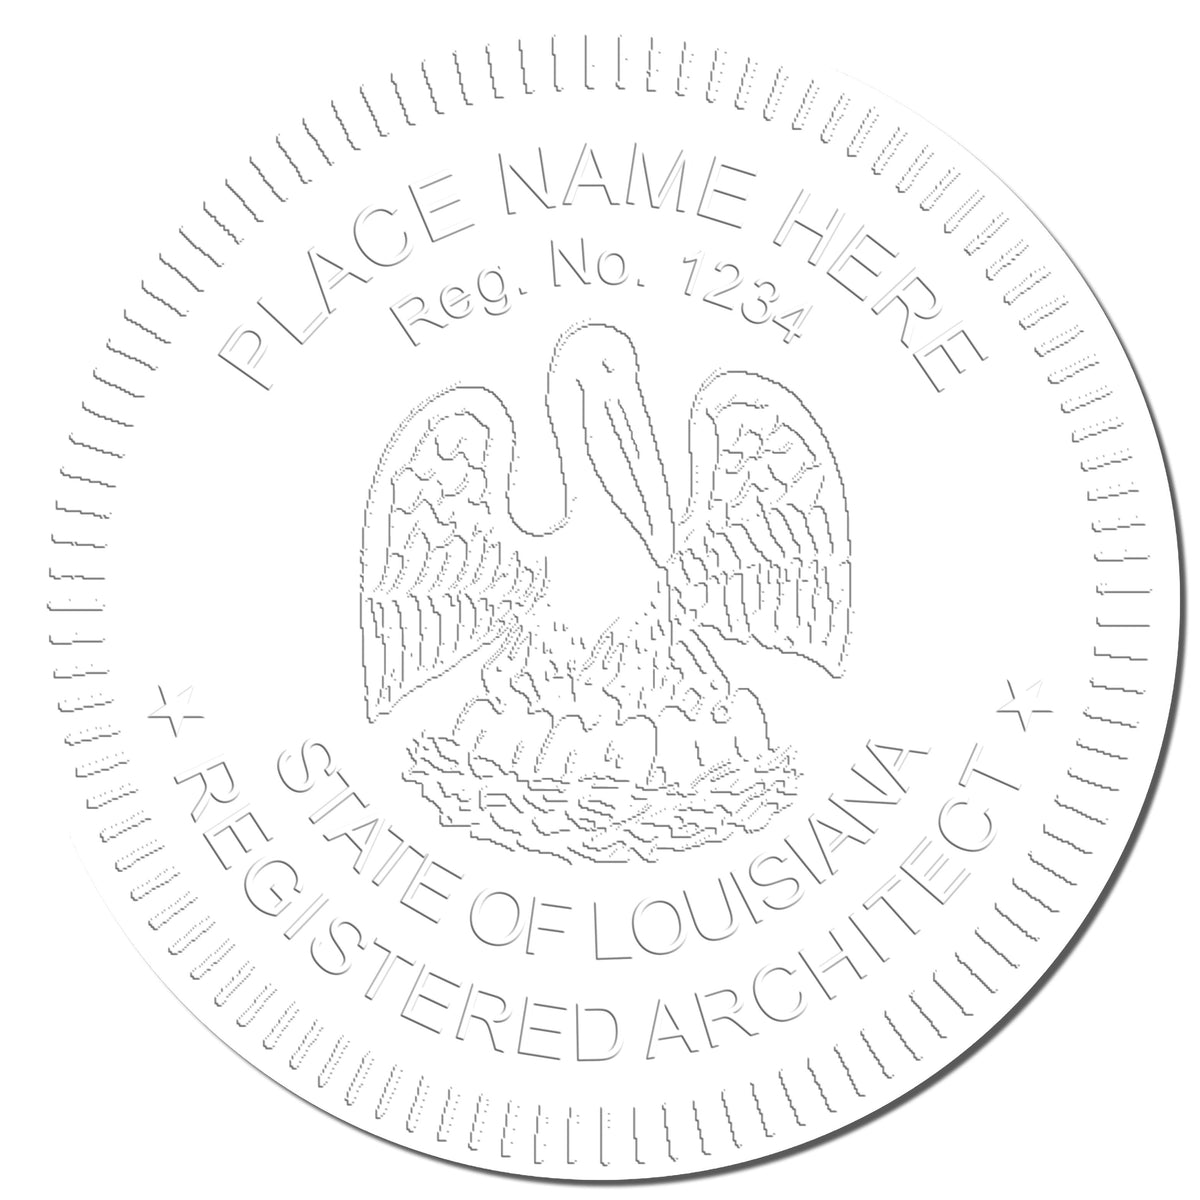 A photograph of the Louisiana Desk Architect Embossing Seal stamp impression reveals a vivid, professional image of the on paper.